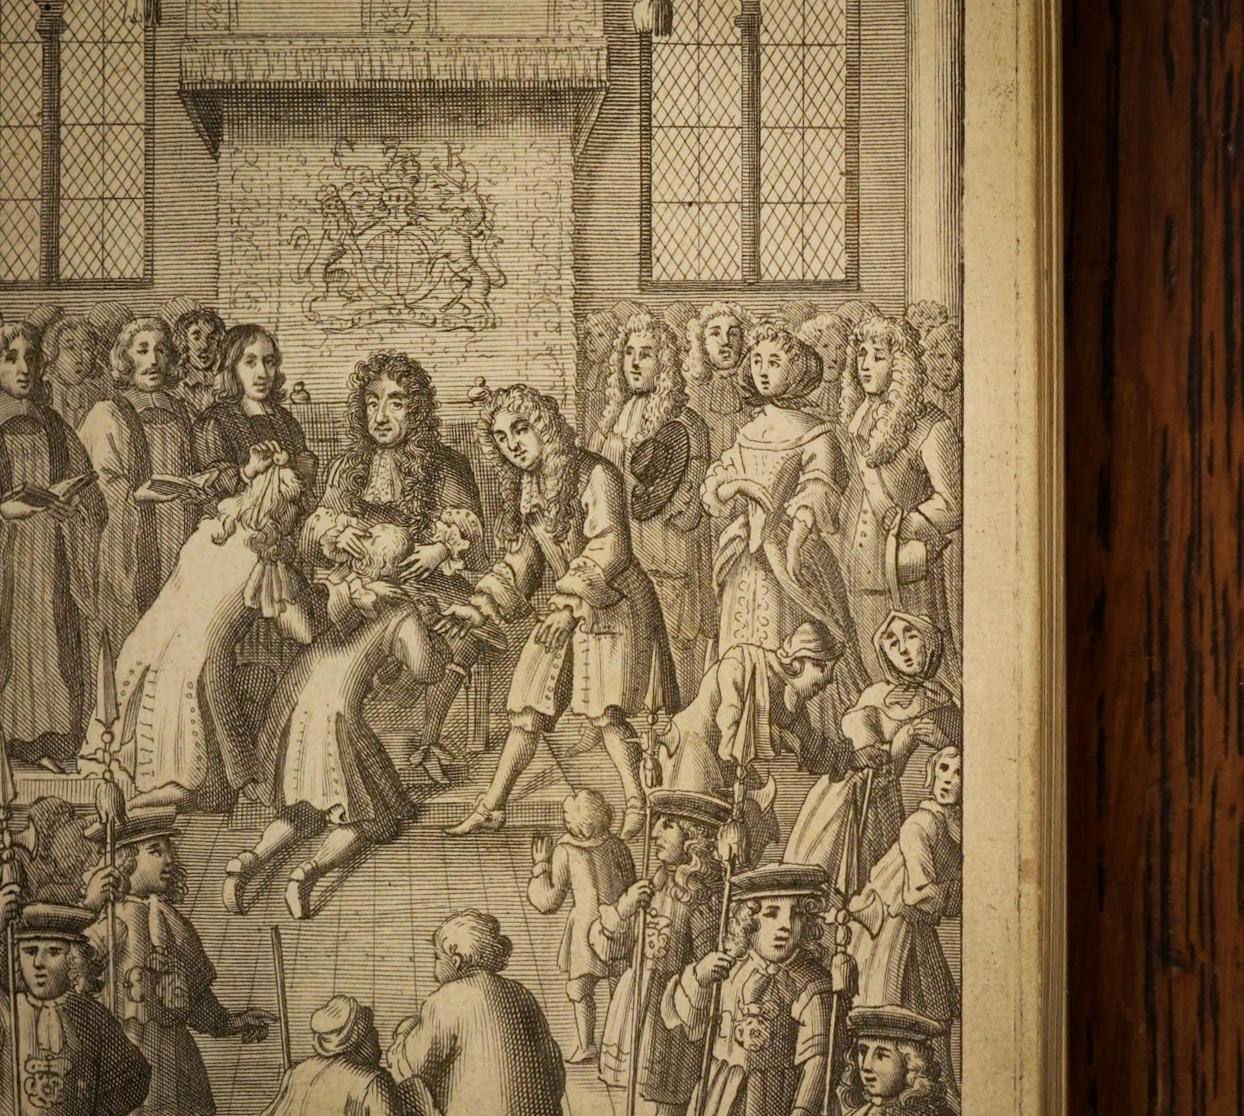 A photograph of an open book against a dark wood background. The page of the book shows an illustration depicting a crowded official ceremony with the King presented with diseased men who are kneeling in front of him.